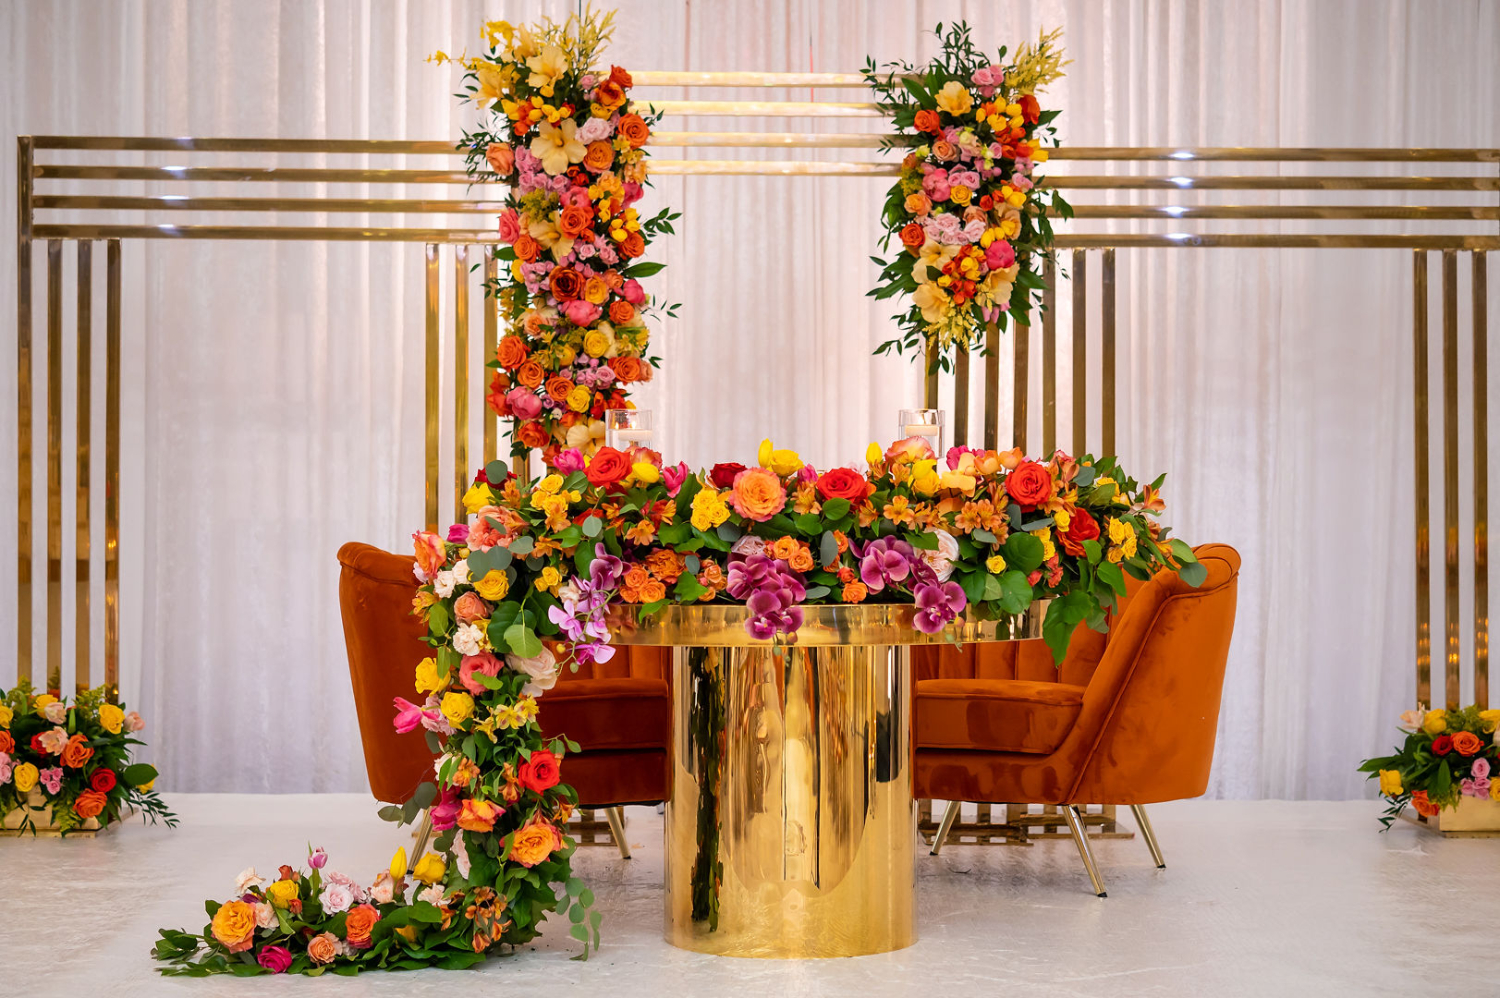 sweetheart table with orange velvet couch and cascading floral centerpieces